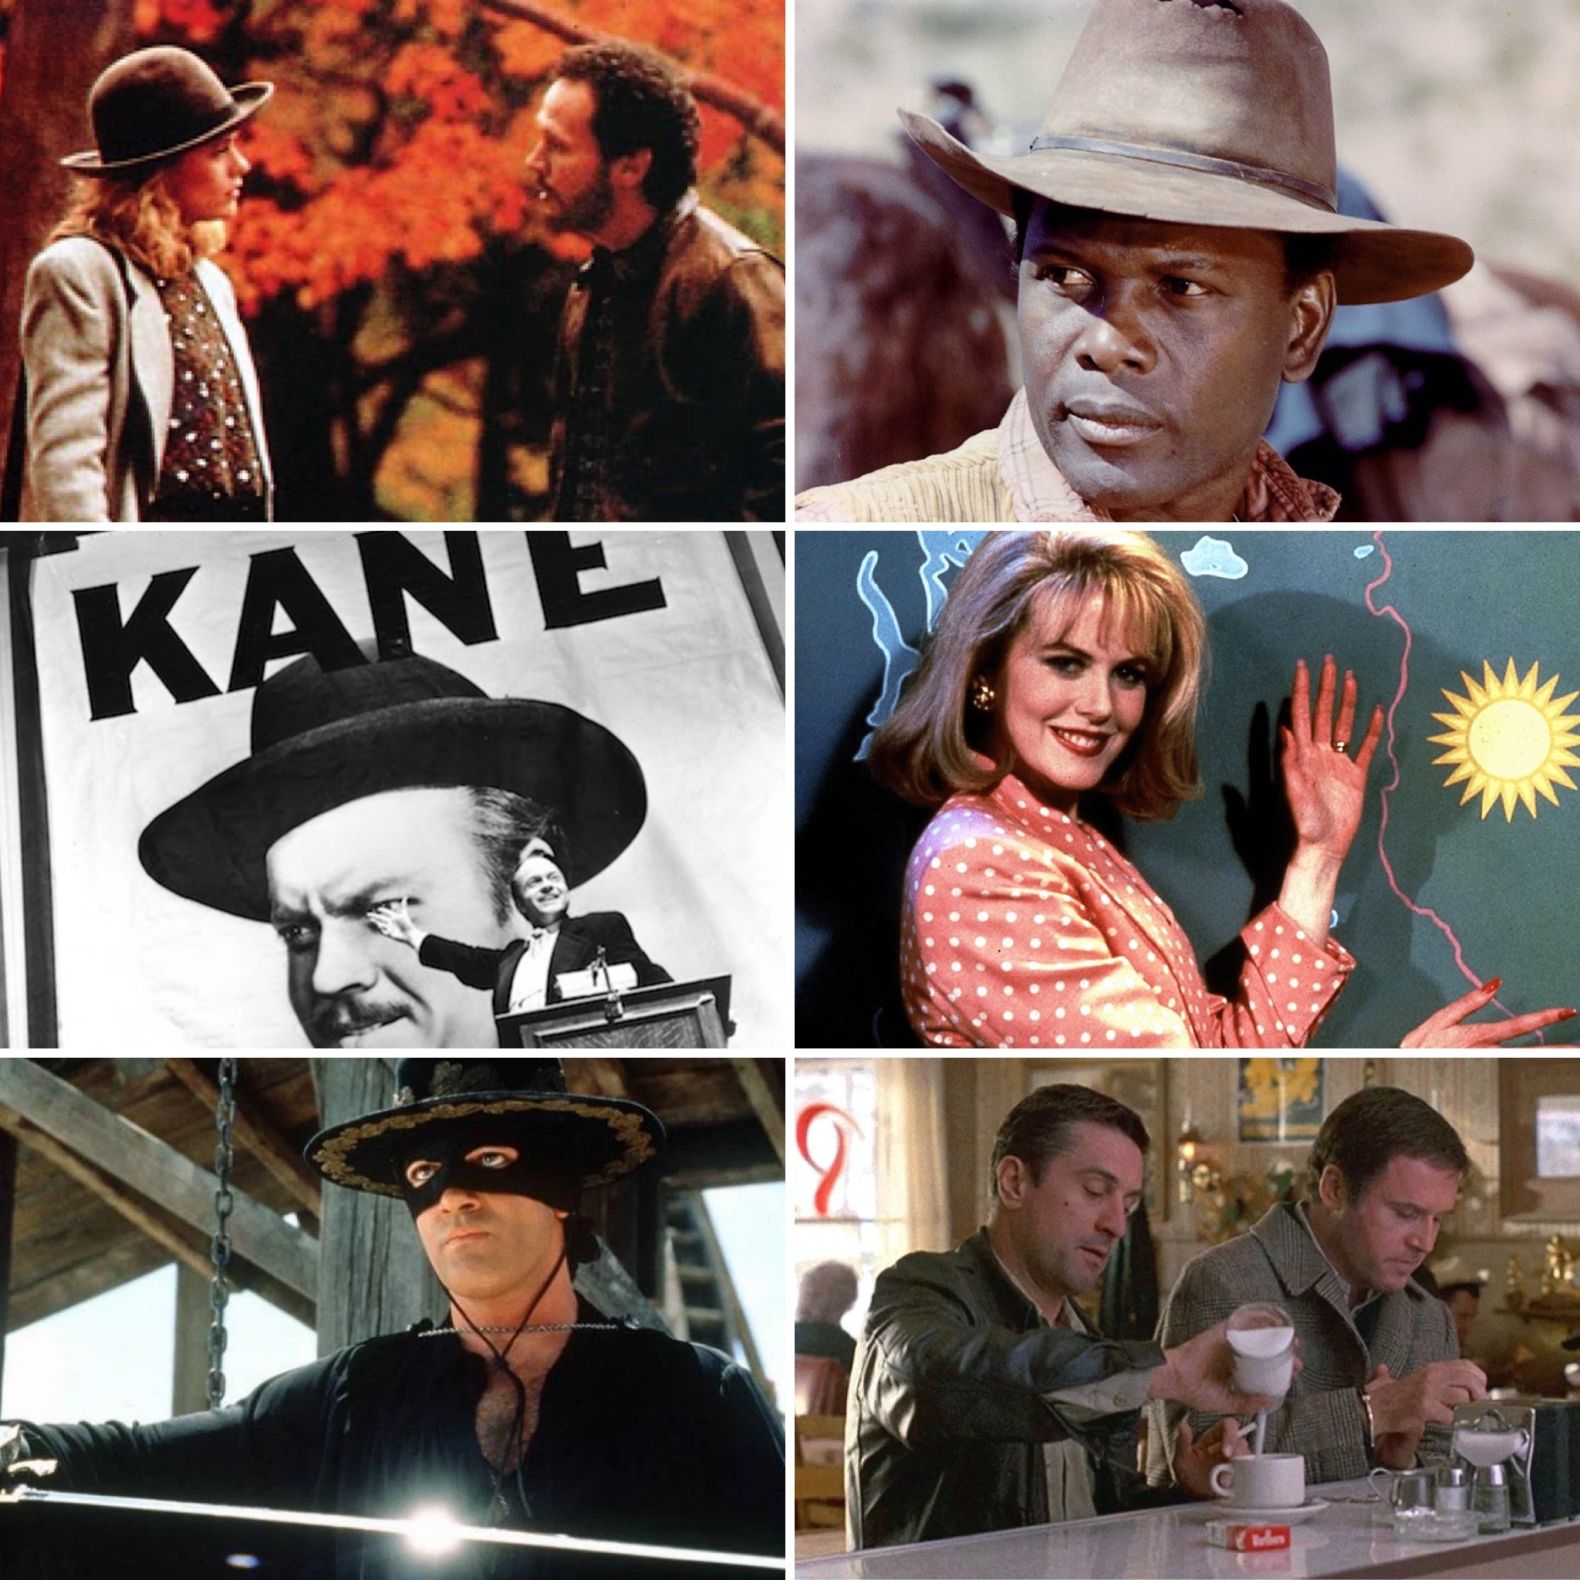 Duke Box #59: Our Guide to the Best Films on TV